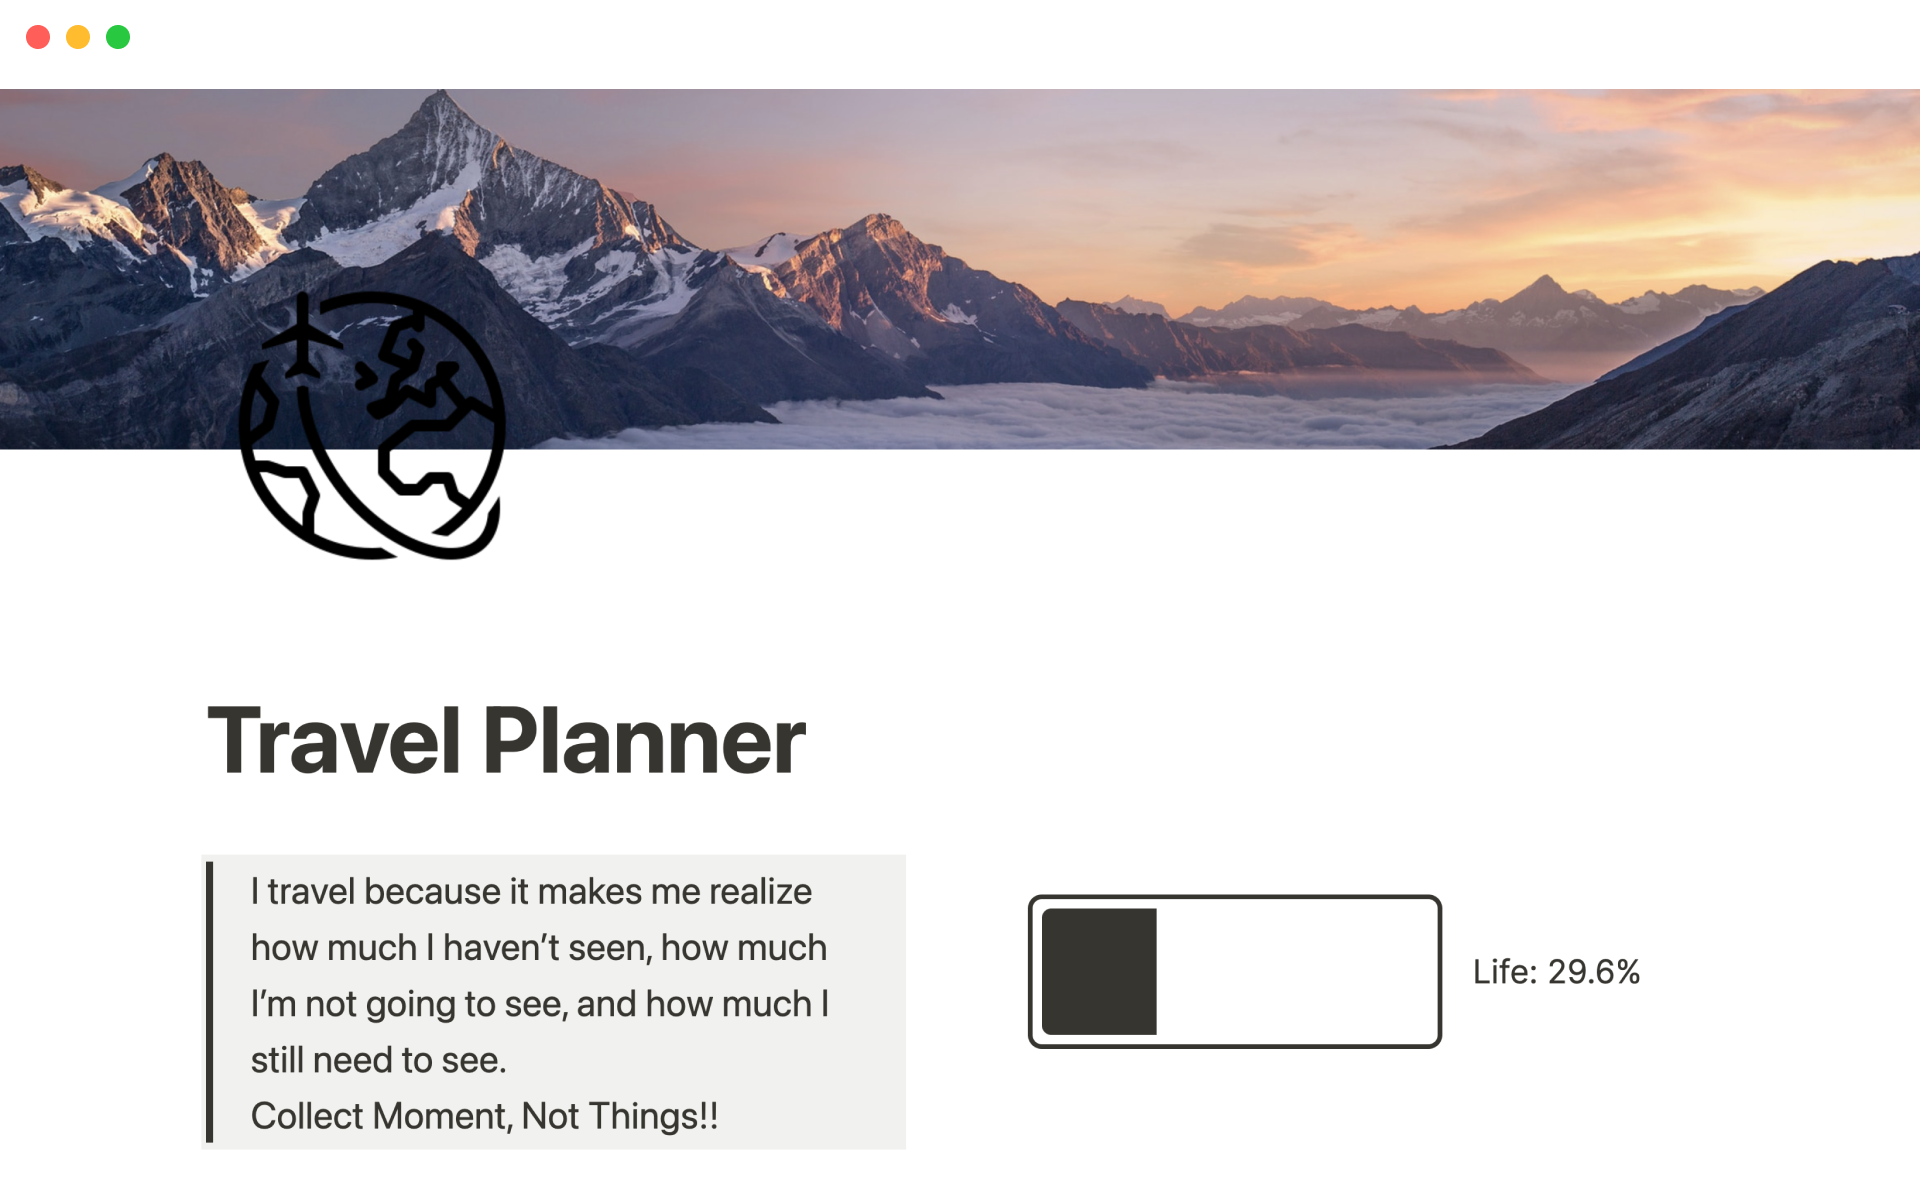 Turn your travel bucket list into a bulletproof action plan and manage all your adventures in one place.